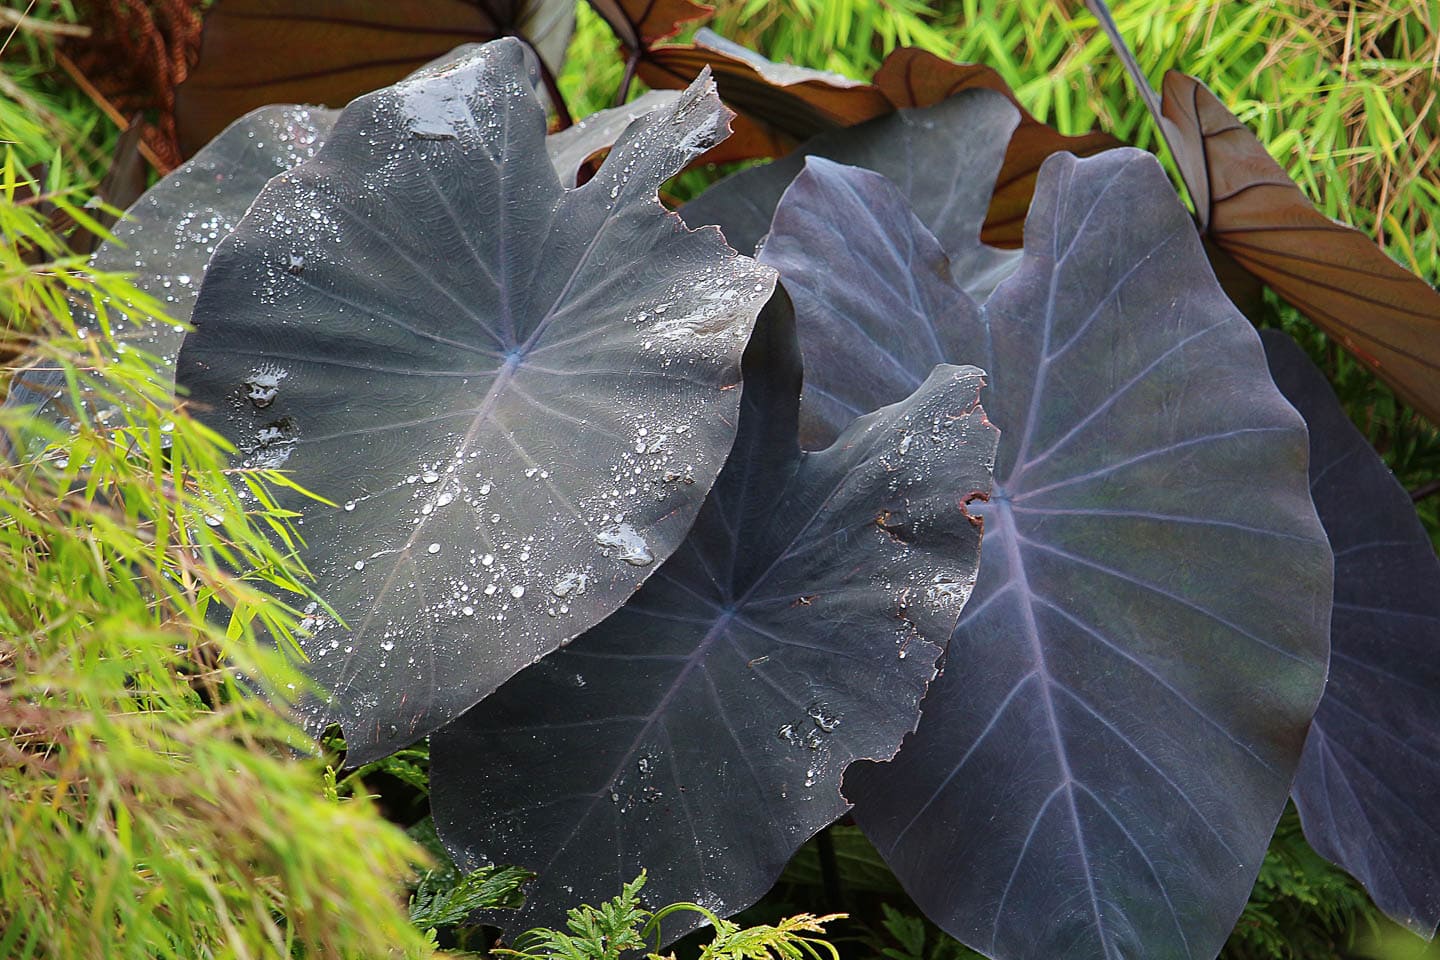 Elephant ears with large black leaves